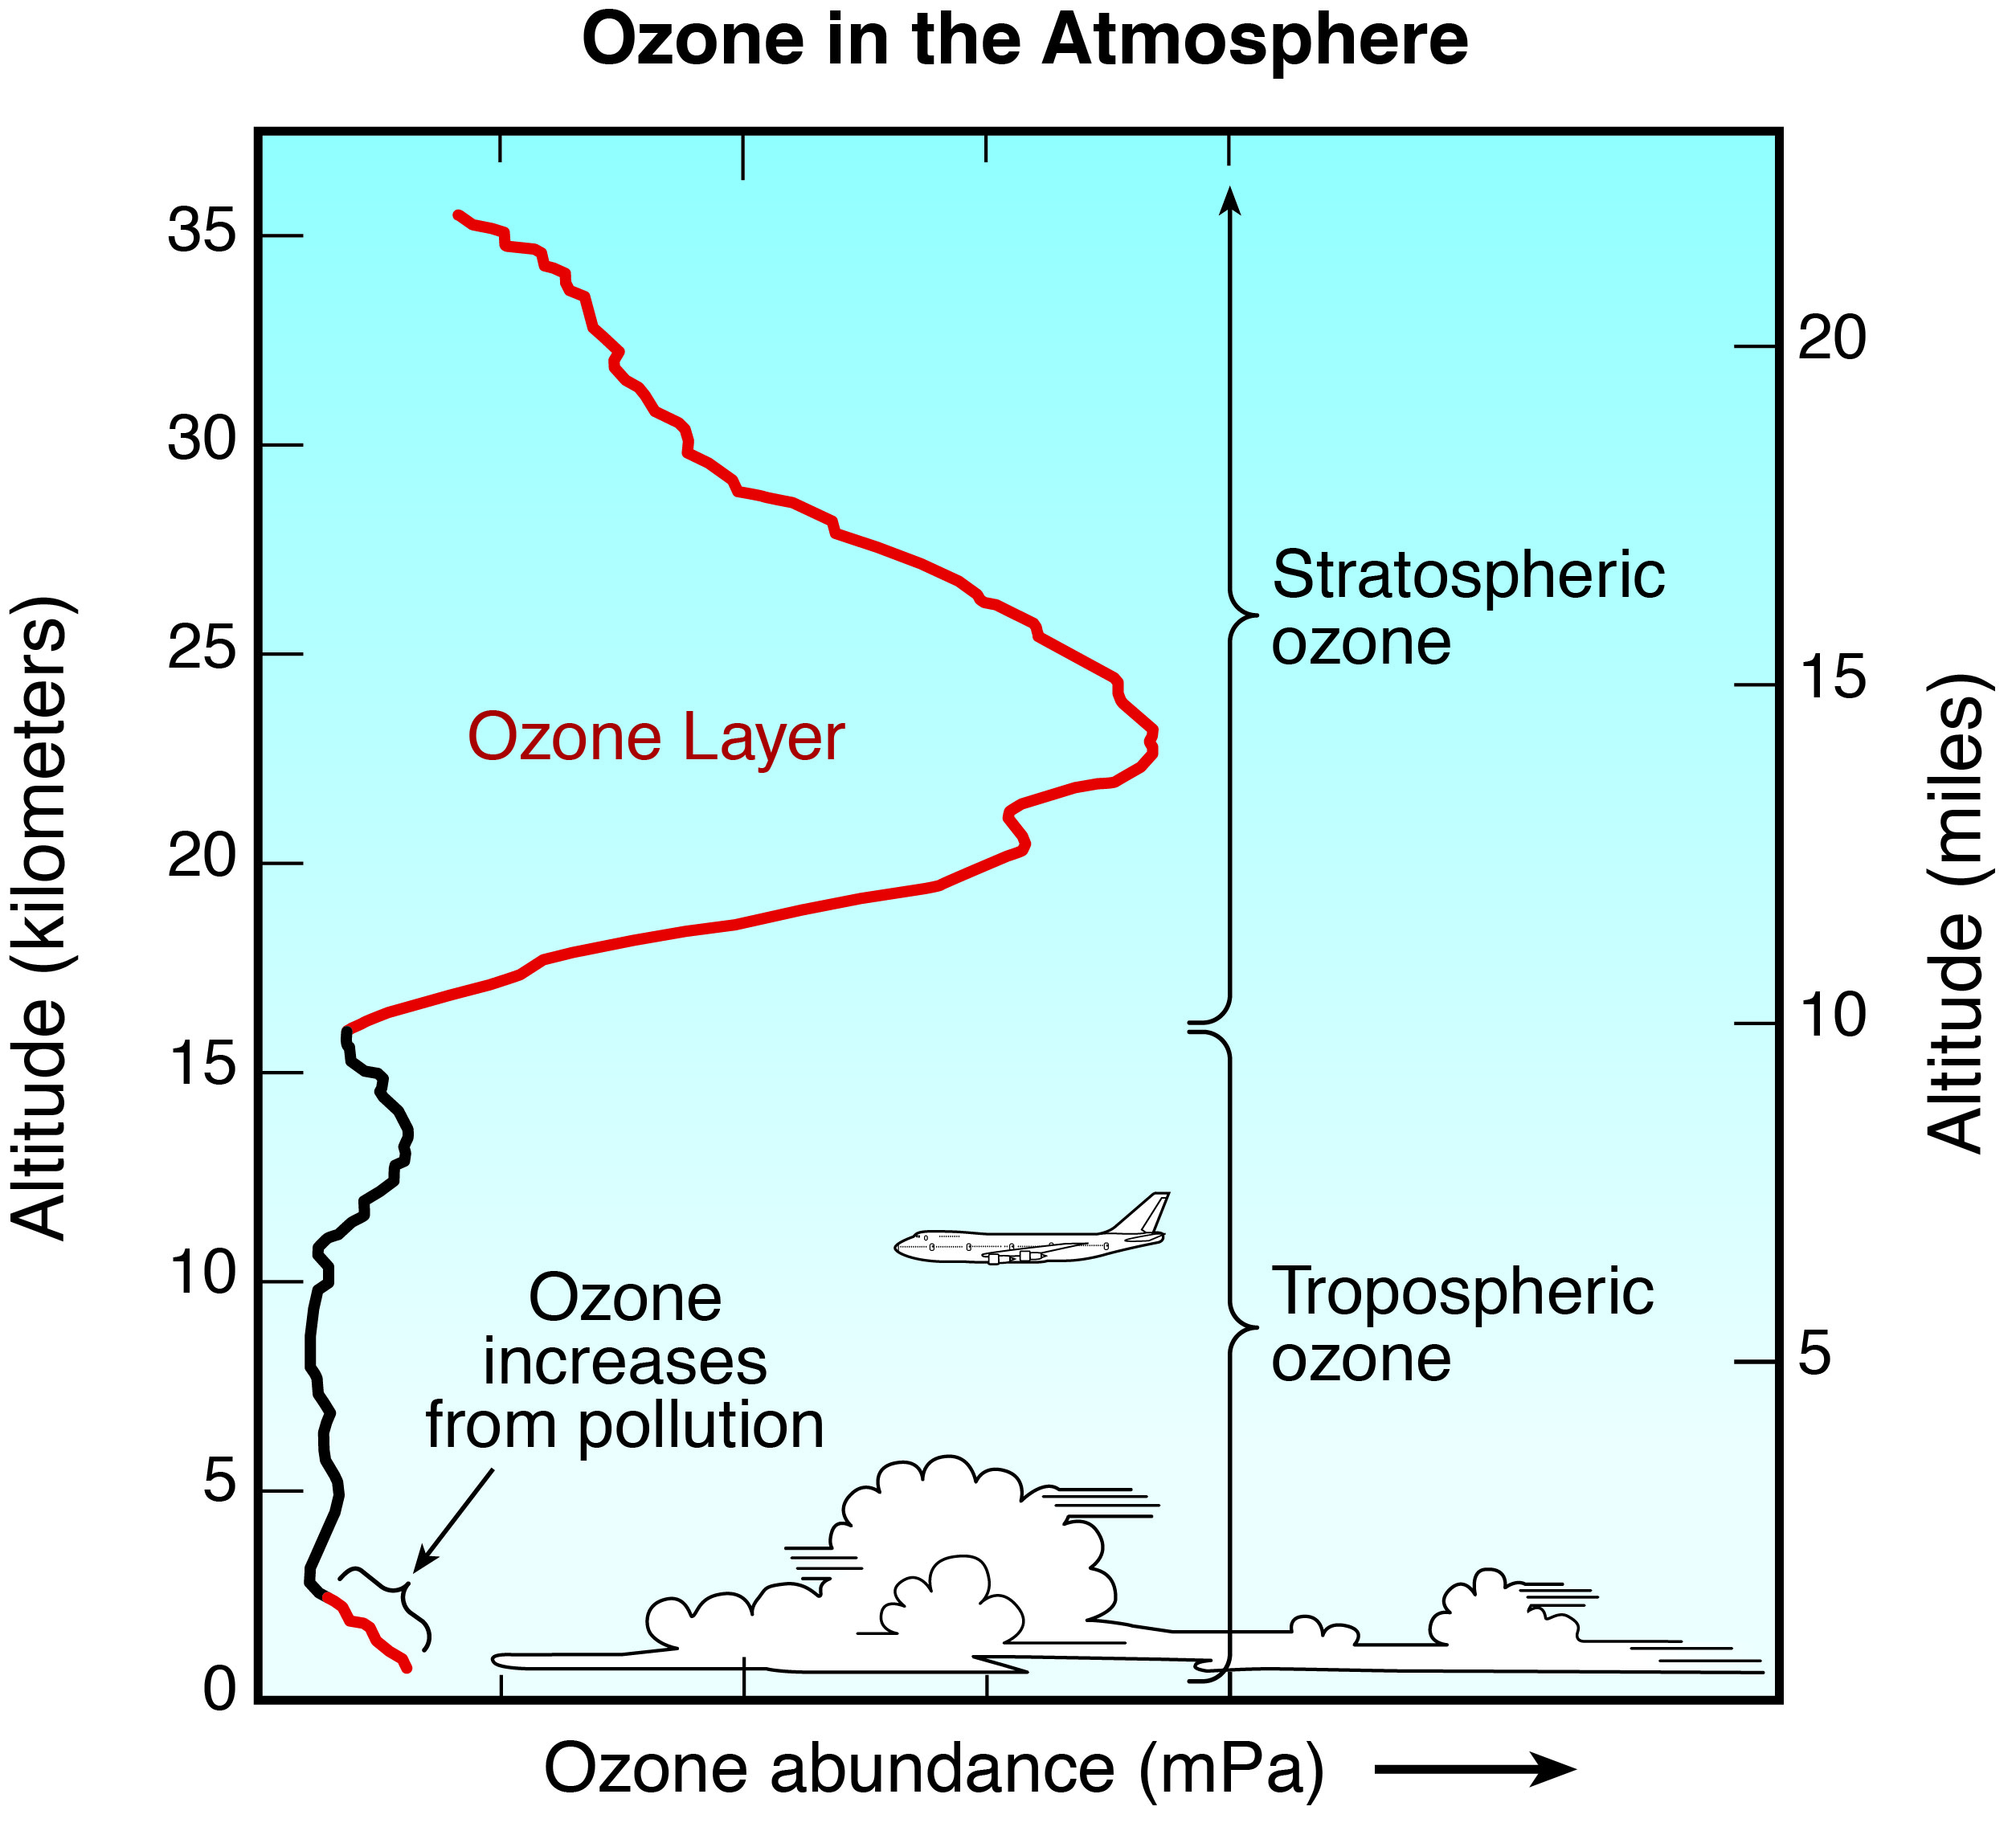 ozone-distribution-in-the-atmosphere